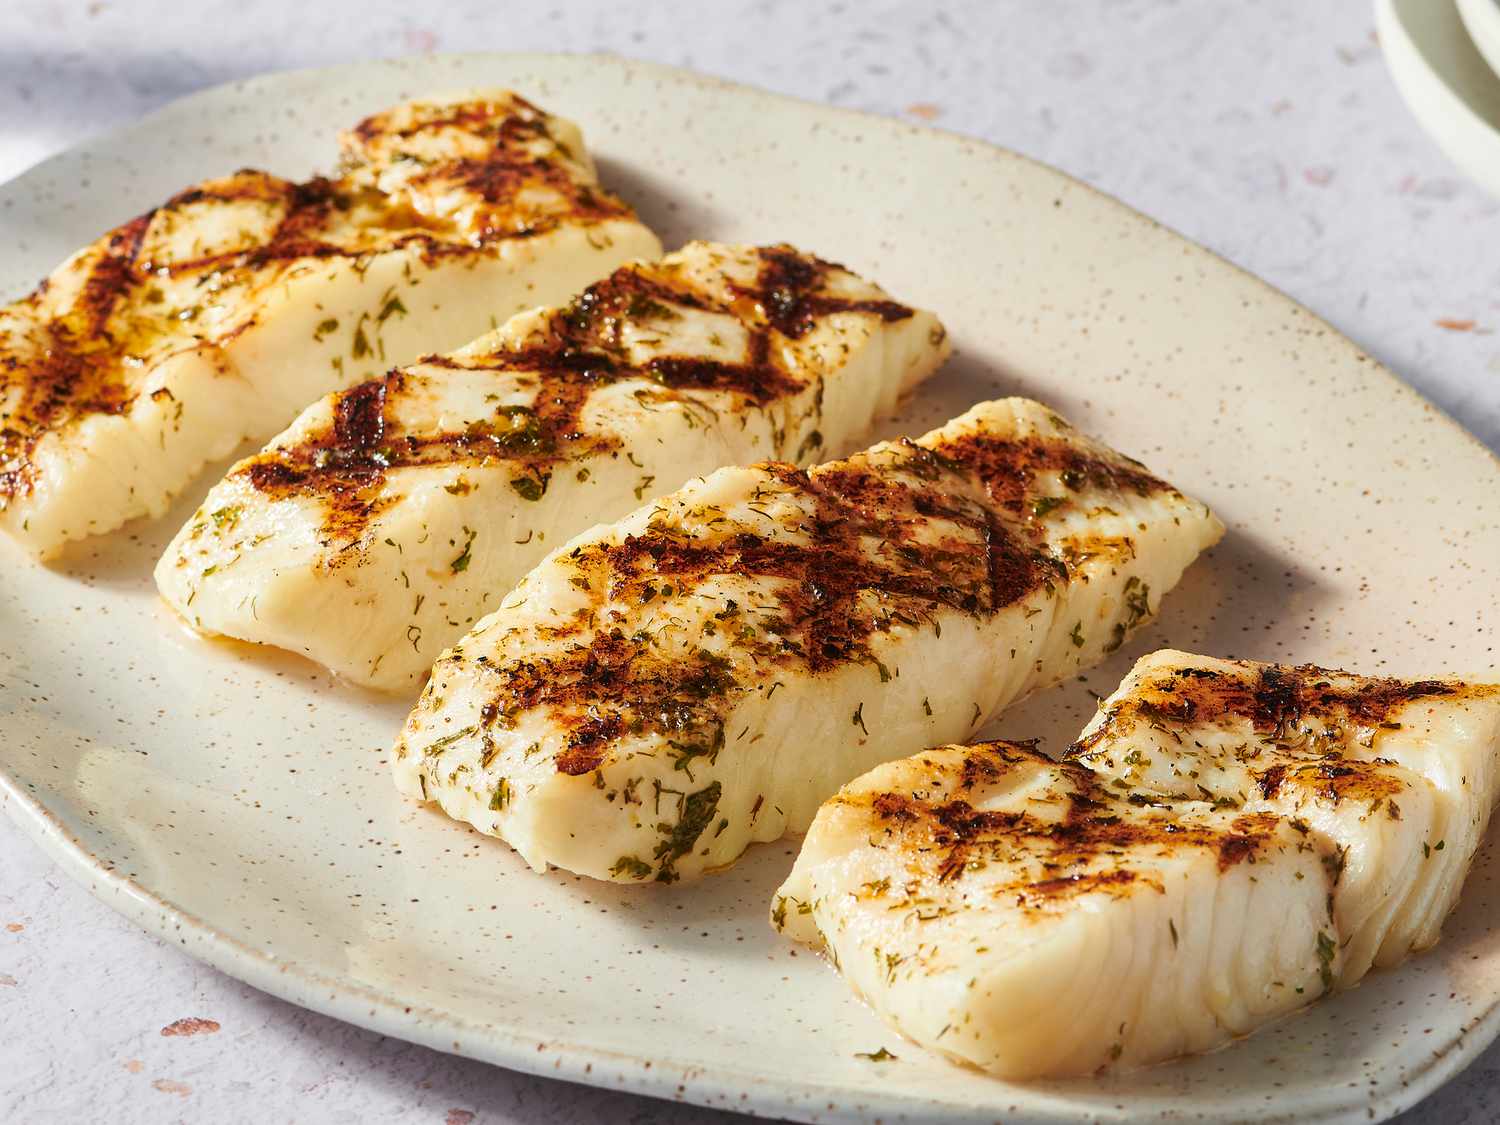 Grilled Halibut: Nutritional Benefits, Preparation Tips, and Serving Suggestions